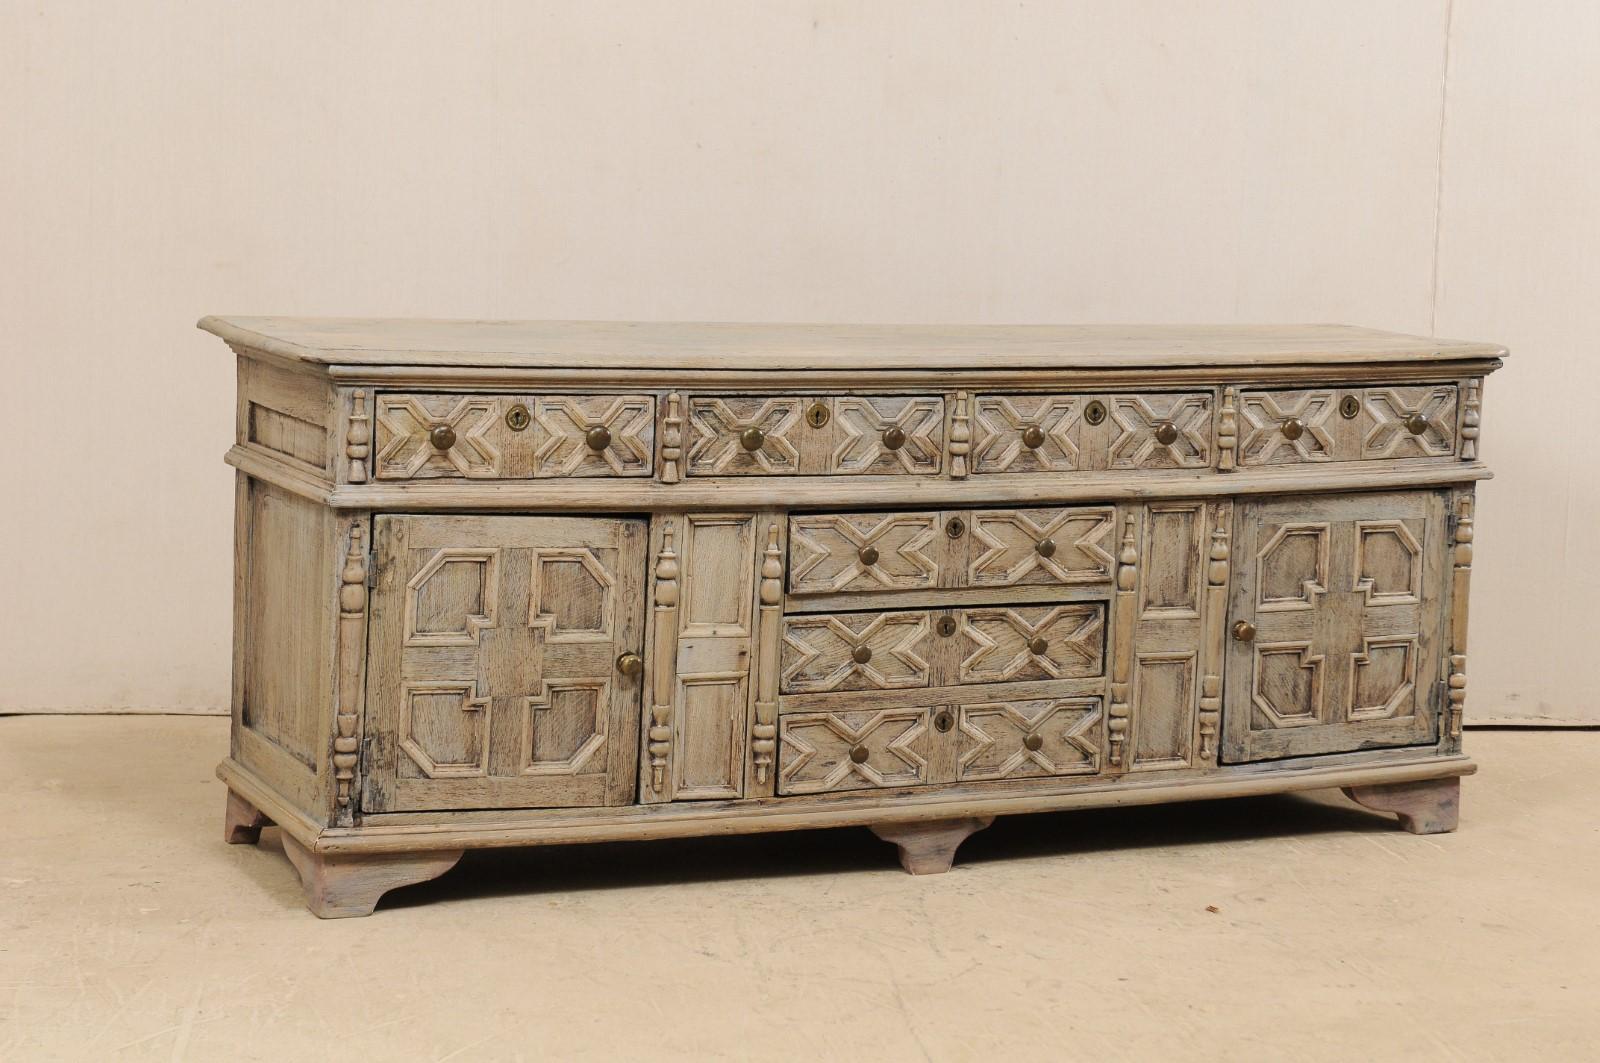 An English console cabinet, with nicely trimmed front, from the 18th century. This antique chest from England features a long rectangular-shaped top over a case which houses four horizontally set drawers above three larger drawers set at lower